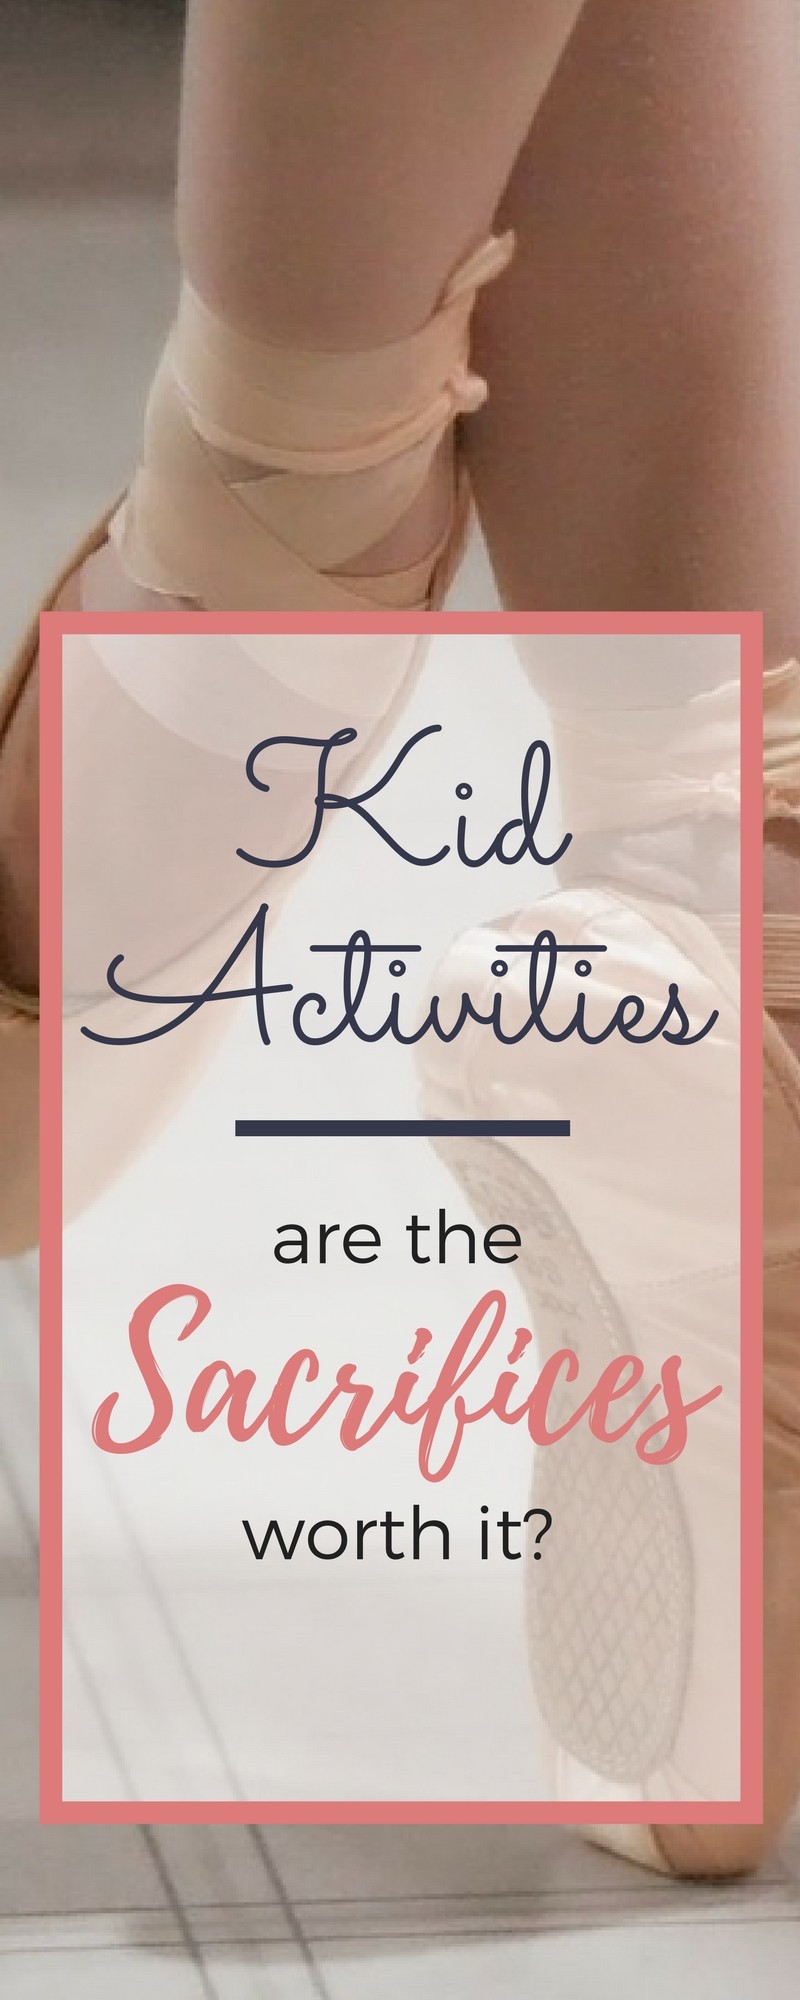 Kid Activities take time, energy, and money! Are the sacrifices worth it? At our house the benefits outweigh the sacrifices, but there's a fine line.